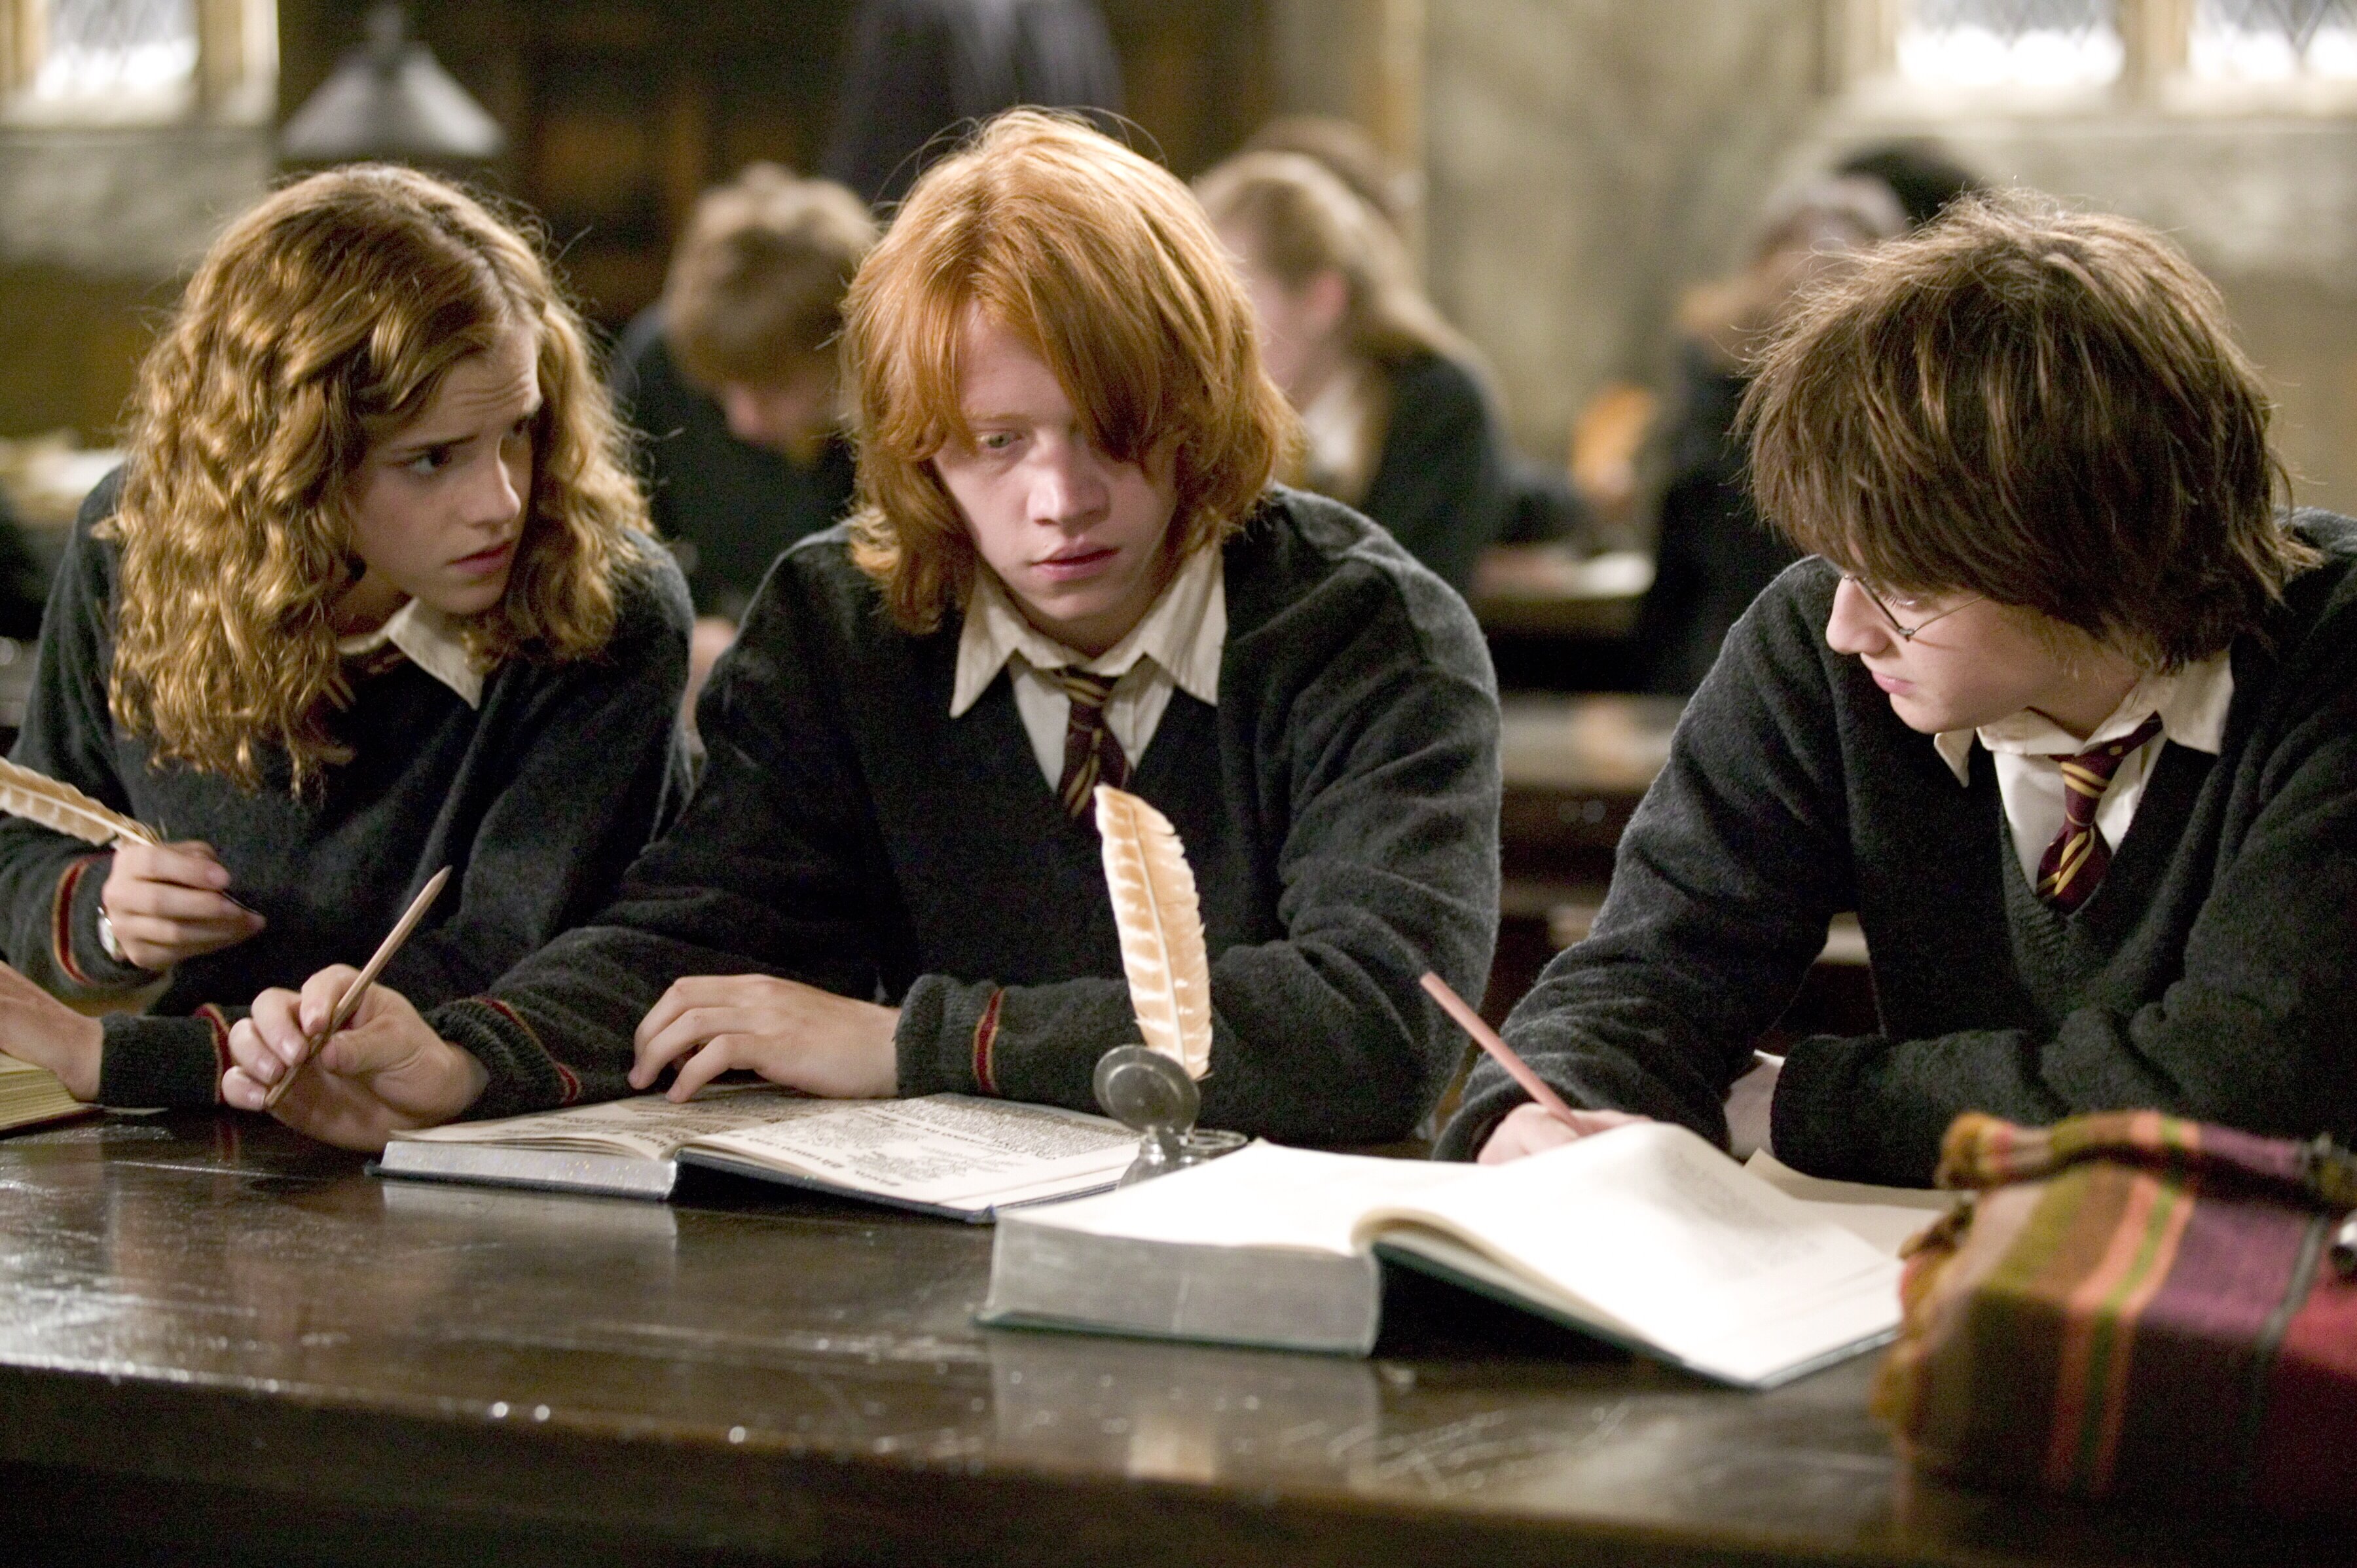 harry potter, ron weasley, hermione granger, movie, harry potter and the goblet of fire, daniel radcliffe, emma watson, rupert grint